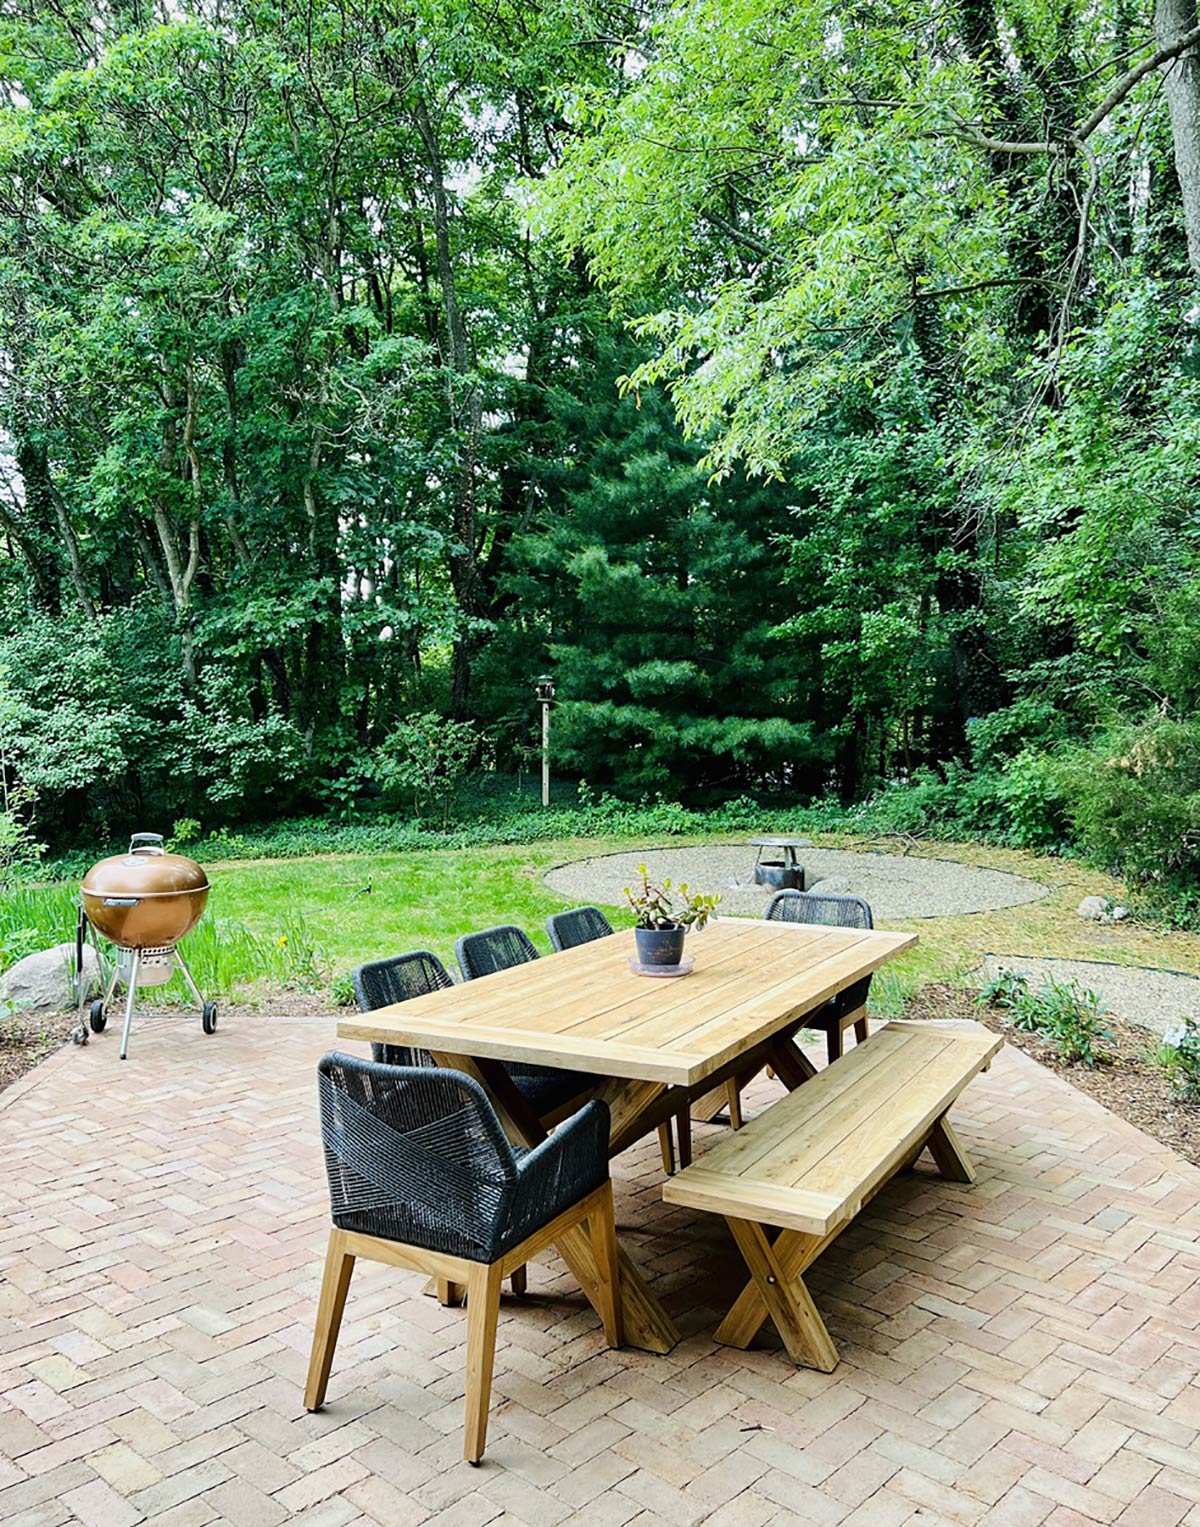 large table chairs and bench on patio surrounded by trees